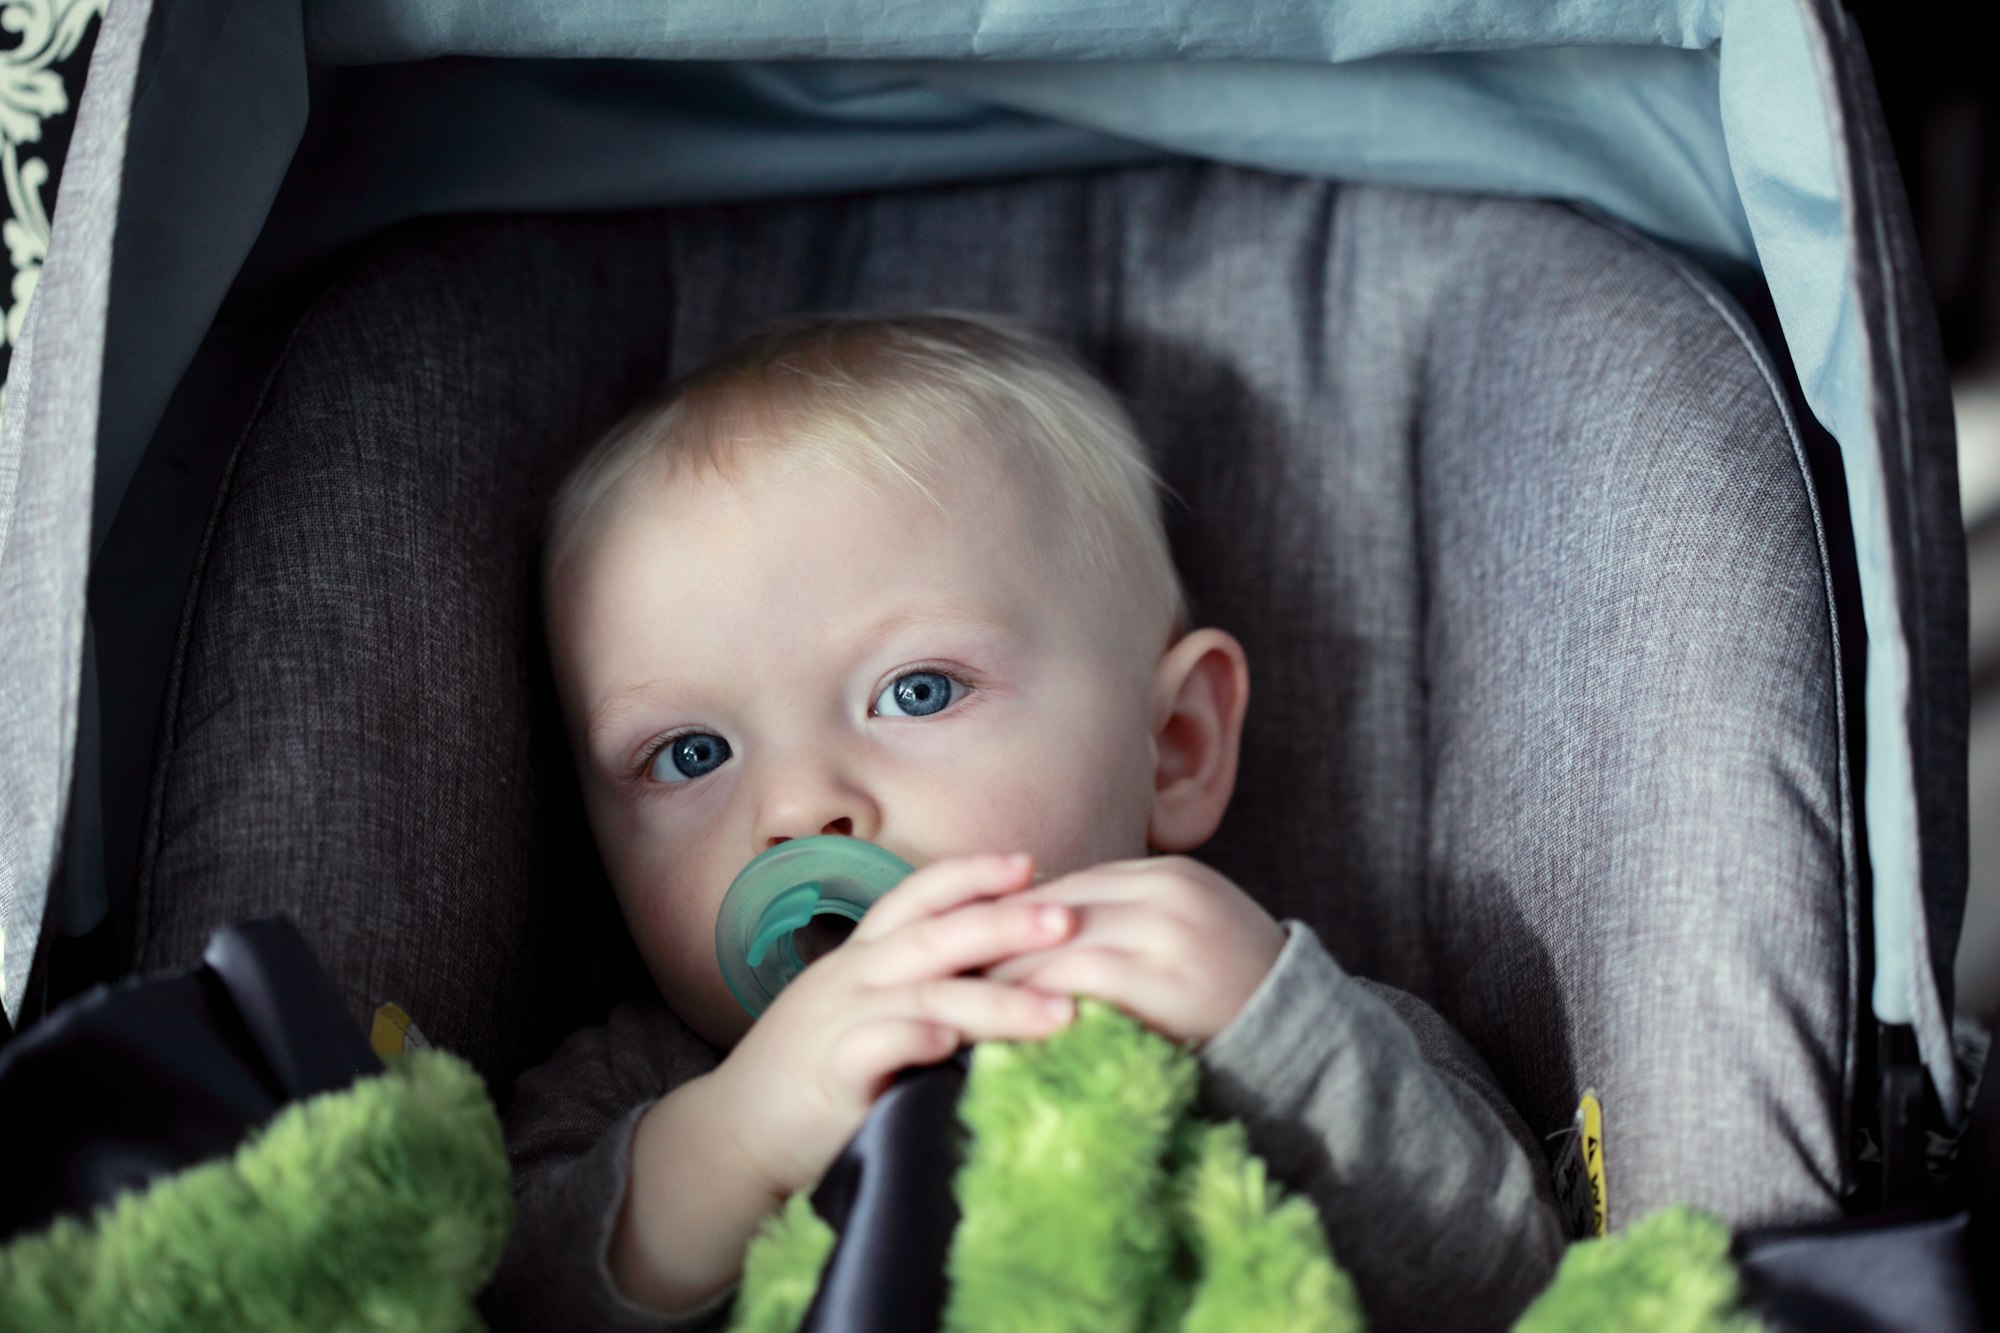 A photo of a one year old baby sitting in his car safety seat. This is our grandson. I shot this using available natural light from a south facing window.